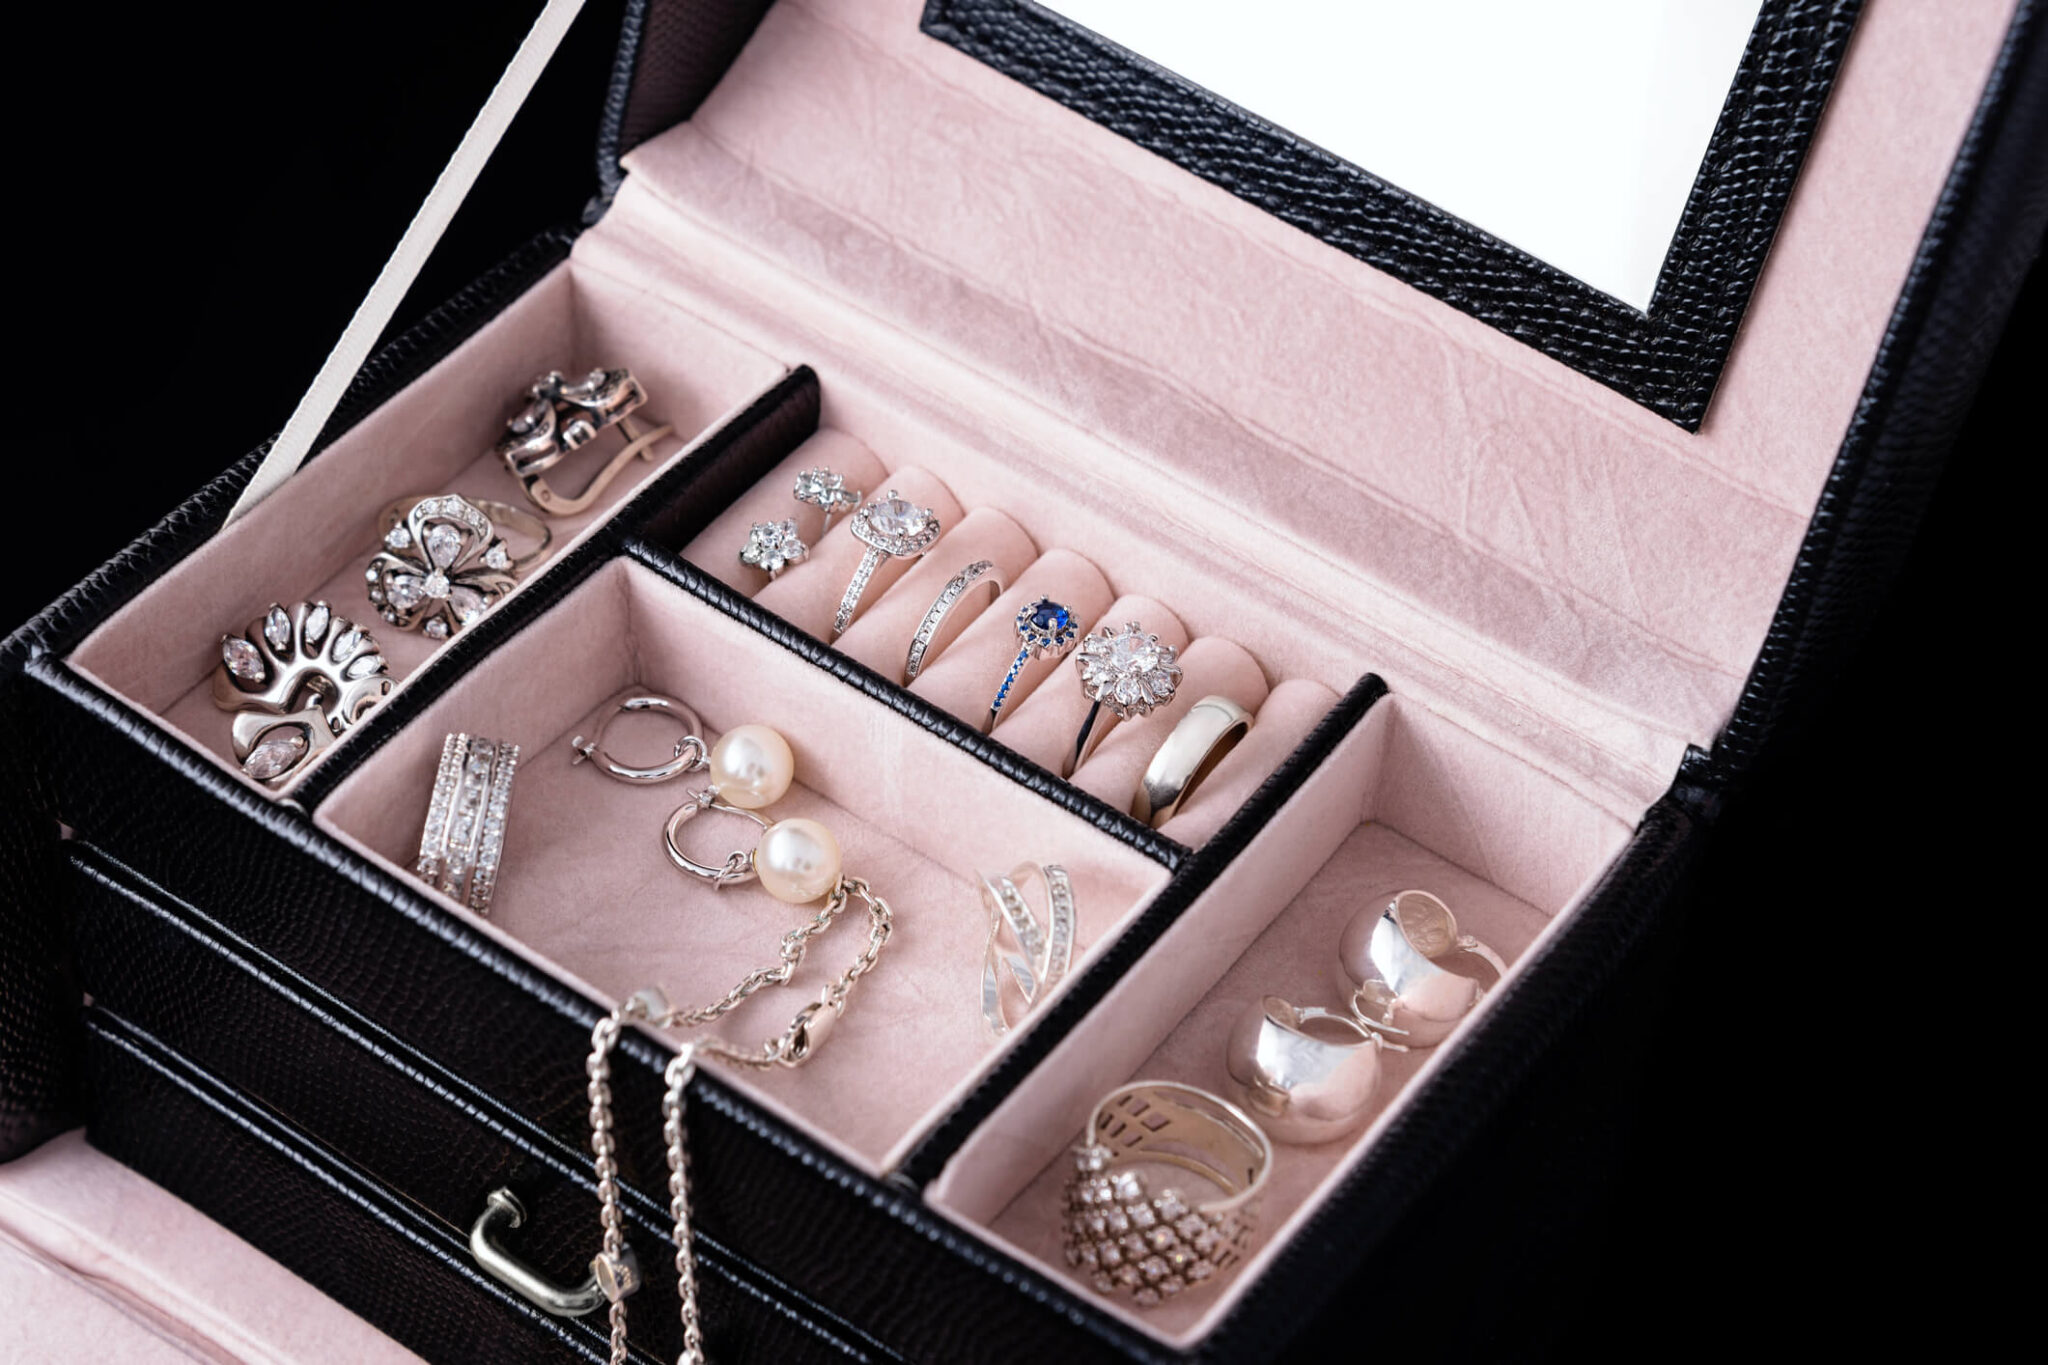 Jewelry box with white gold and silver rings, earrings and pendants with pearls